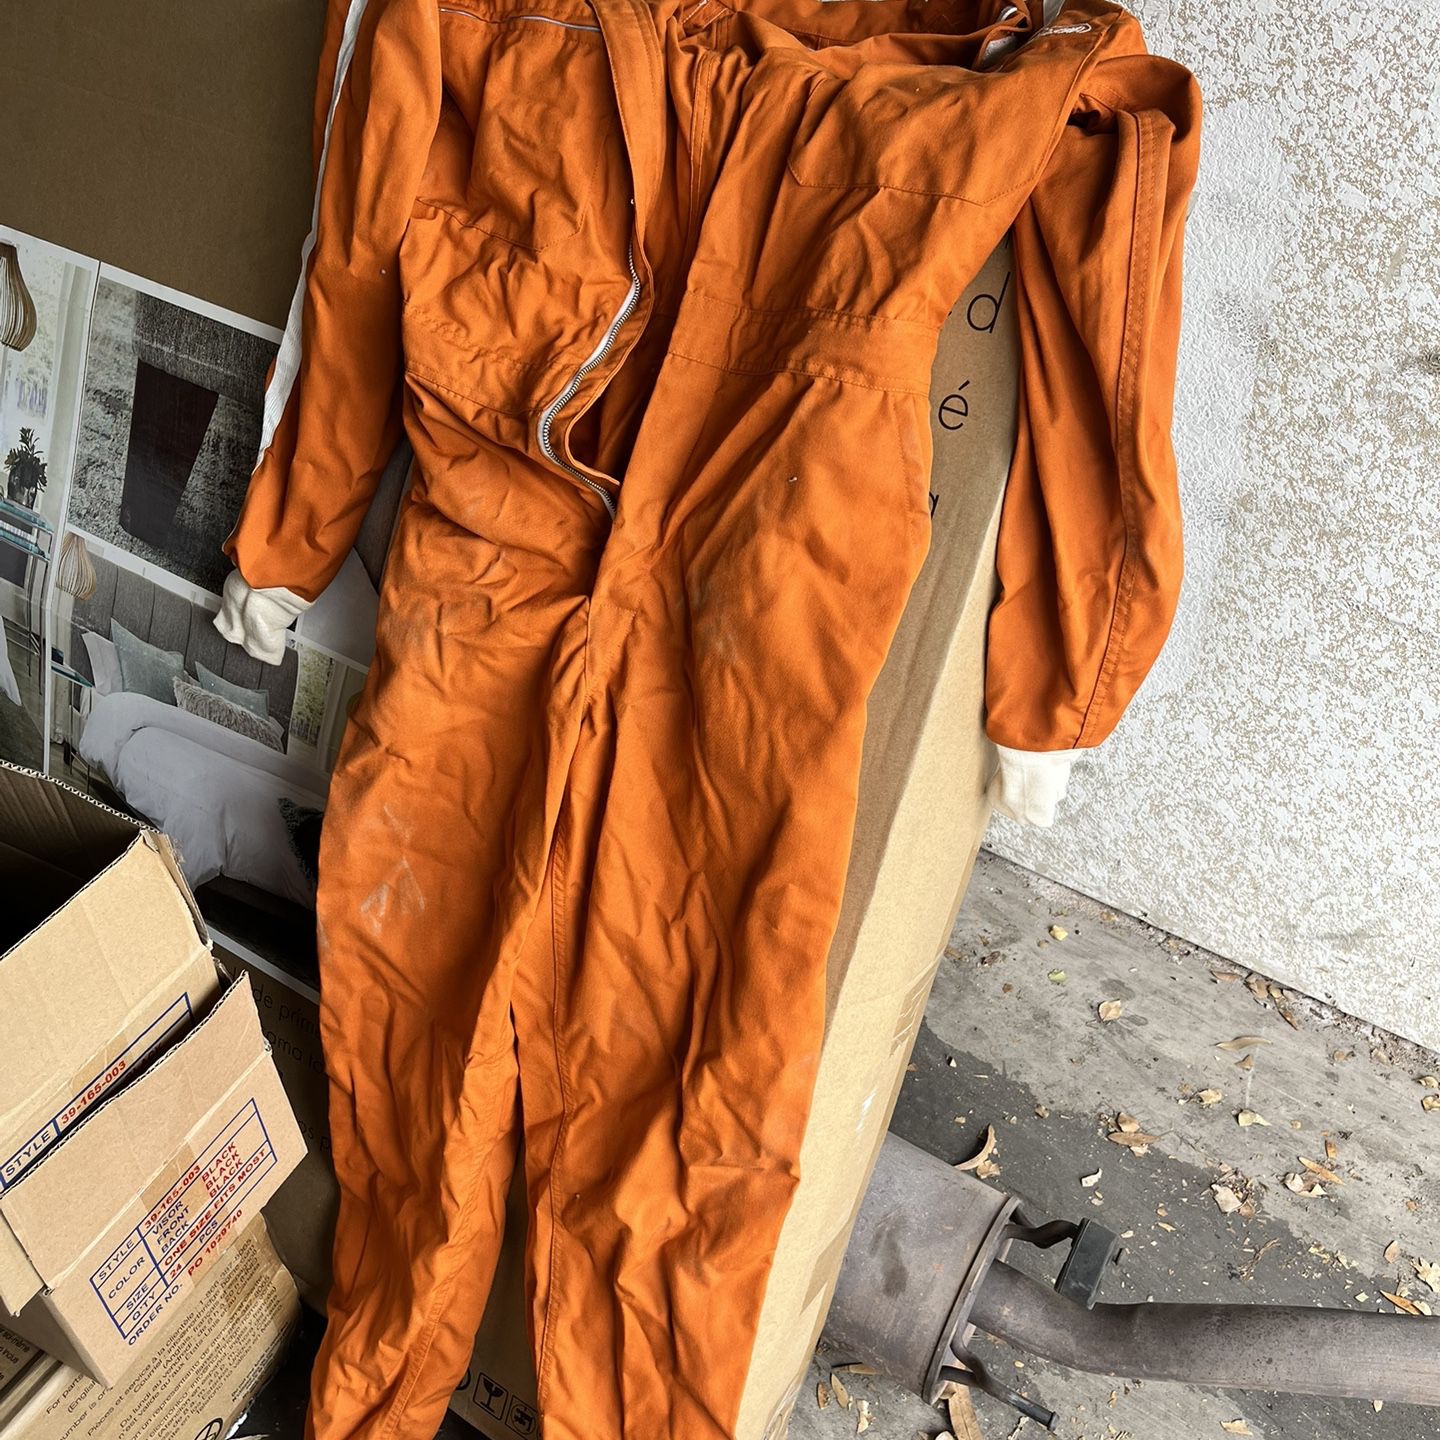 Vintage Nomex Worth Company Racing Suit for Sale in Peoria, AZ